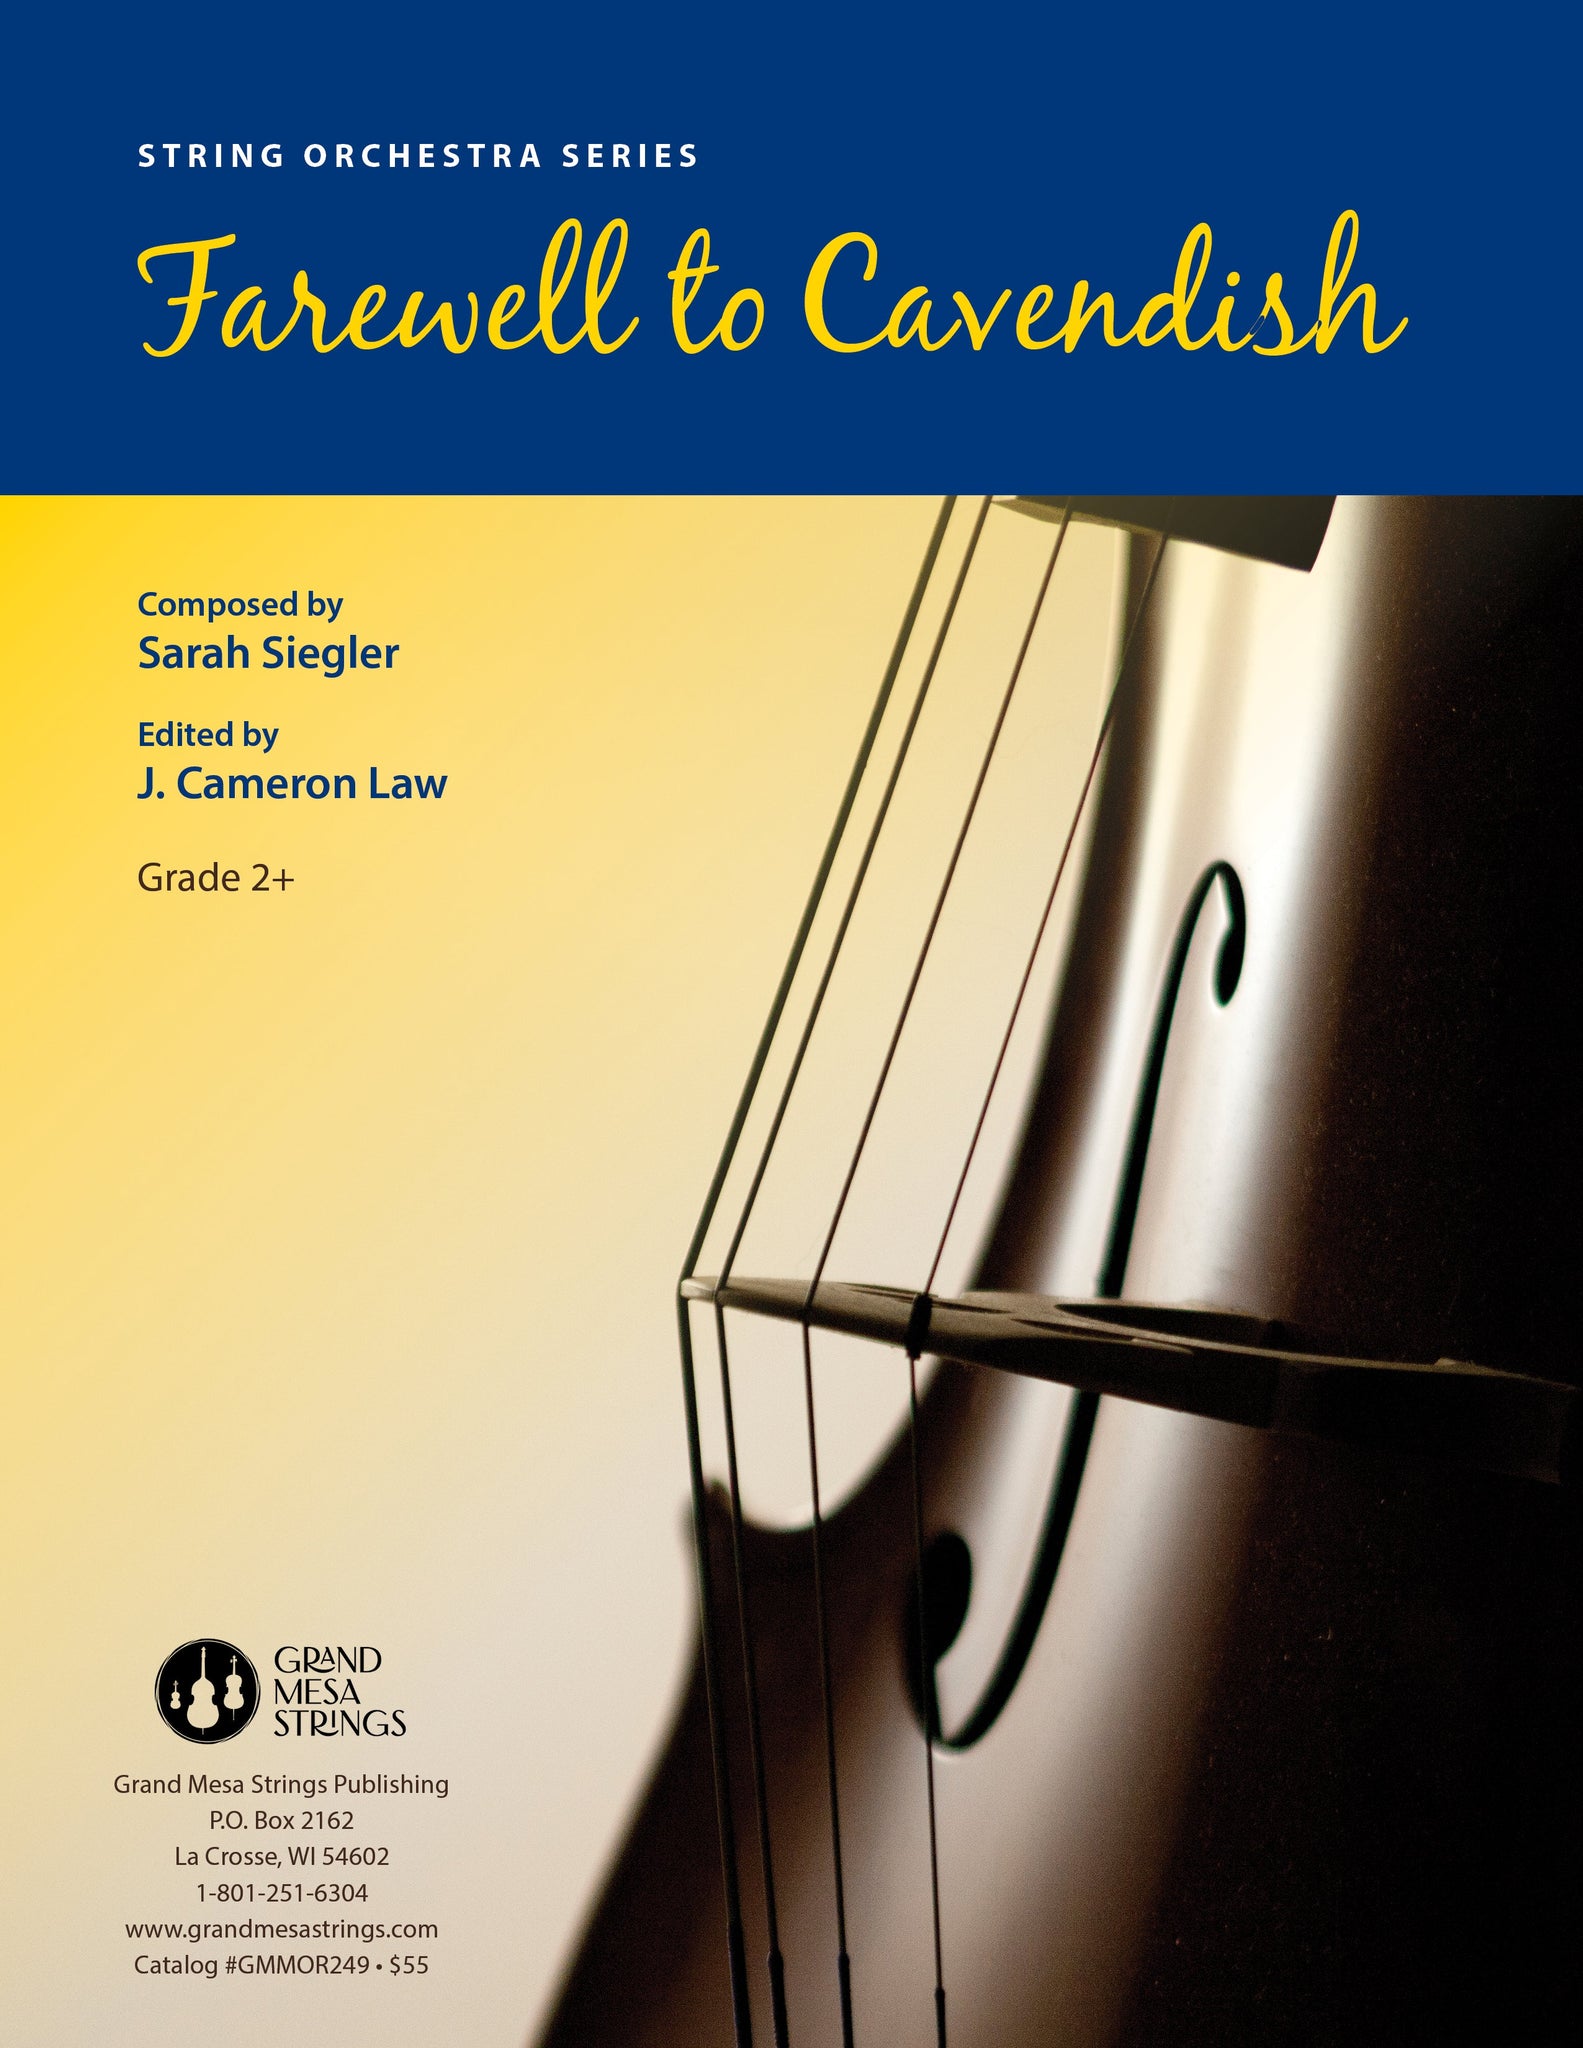 Strings sheet music cover of Farewell to Cavendish, composed by Sarah Siegler.